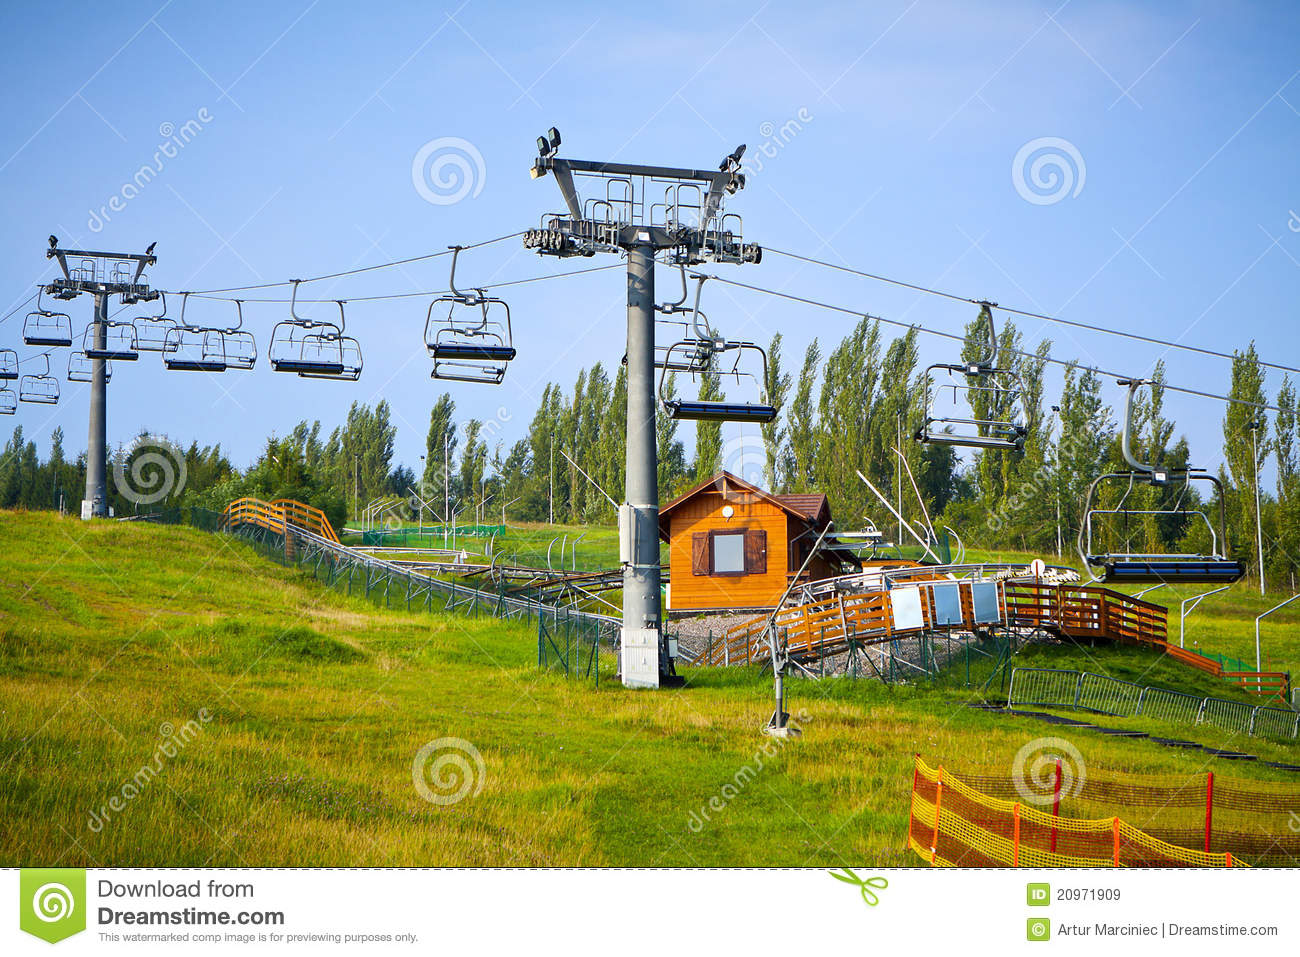 Ski Lift  Chairlift In Summer  Royalty Free Stock Images   Image    